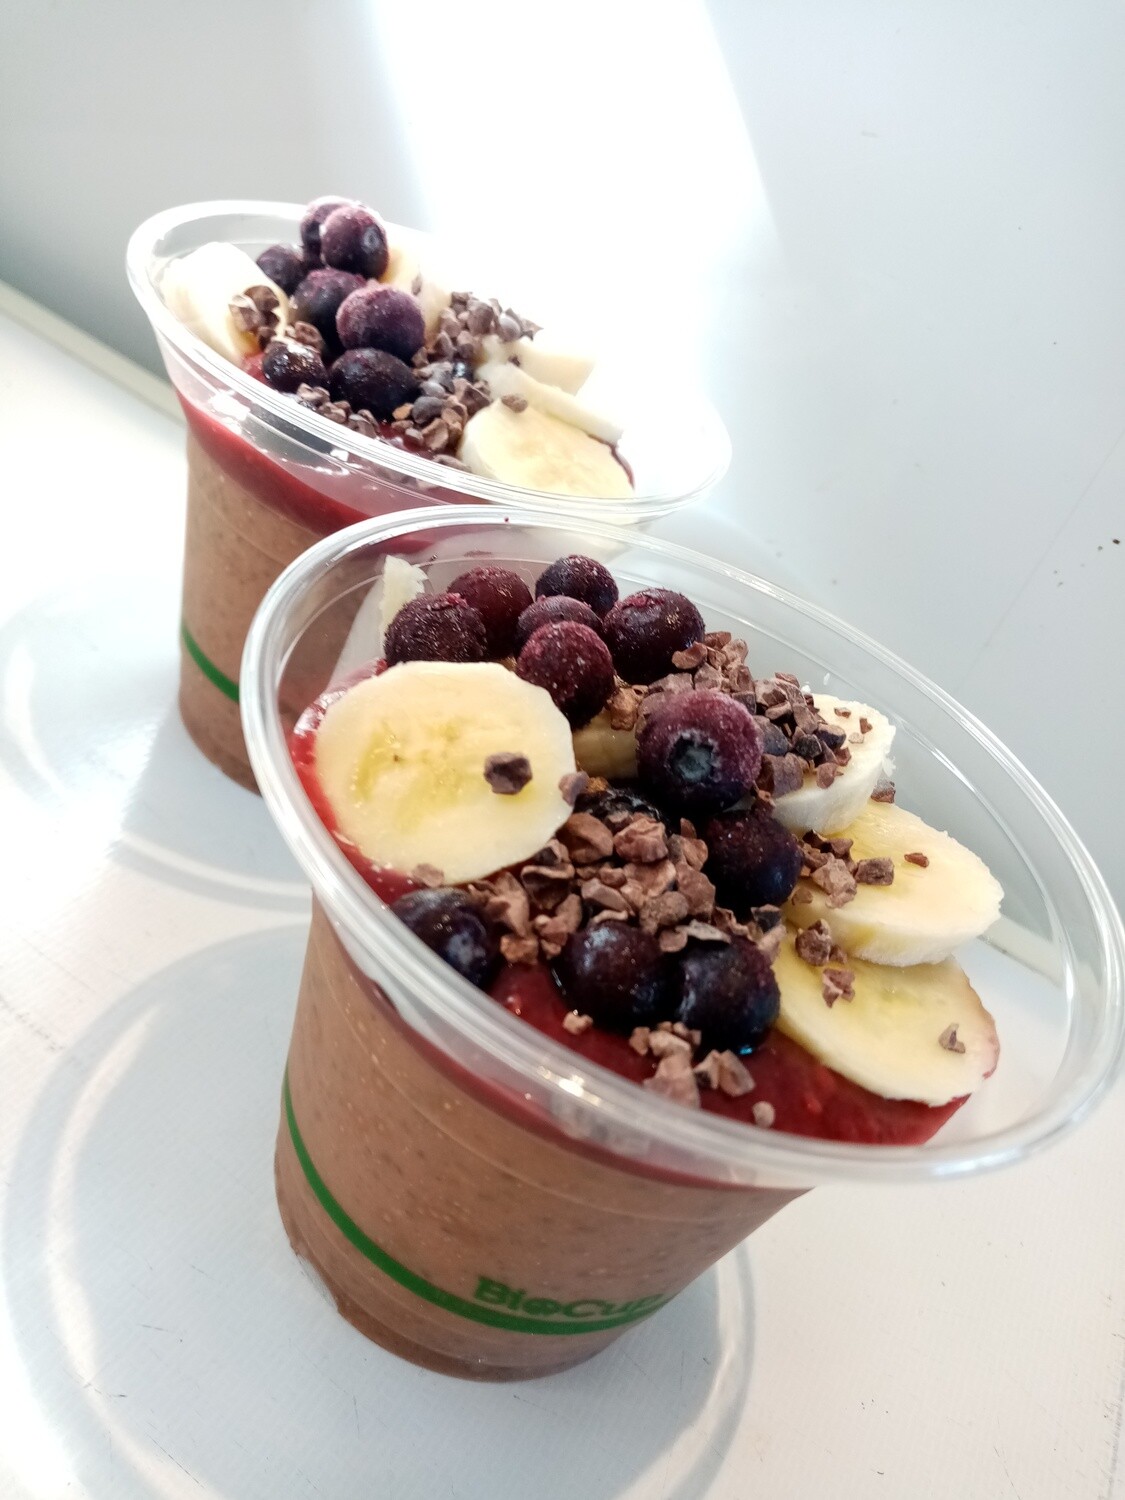 RAW CACAO CHIA PUD. with banana, chia, coconut milk, maple syrup, cacao, peanut butter. Topped with Berry compote, cacao nibs, banana. GF,DF
200ml or 400ml